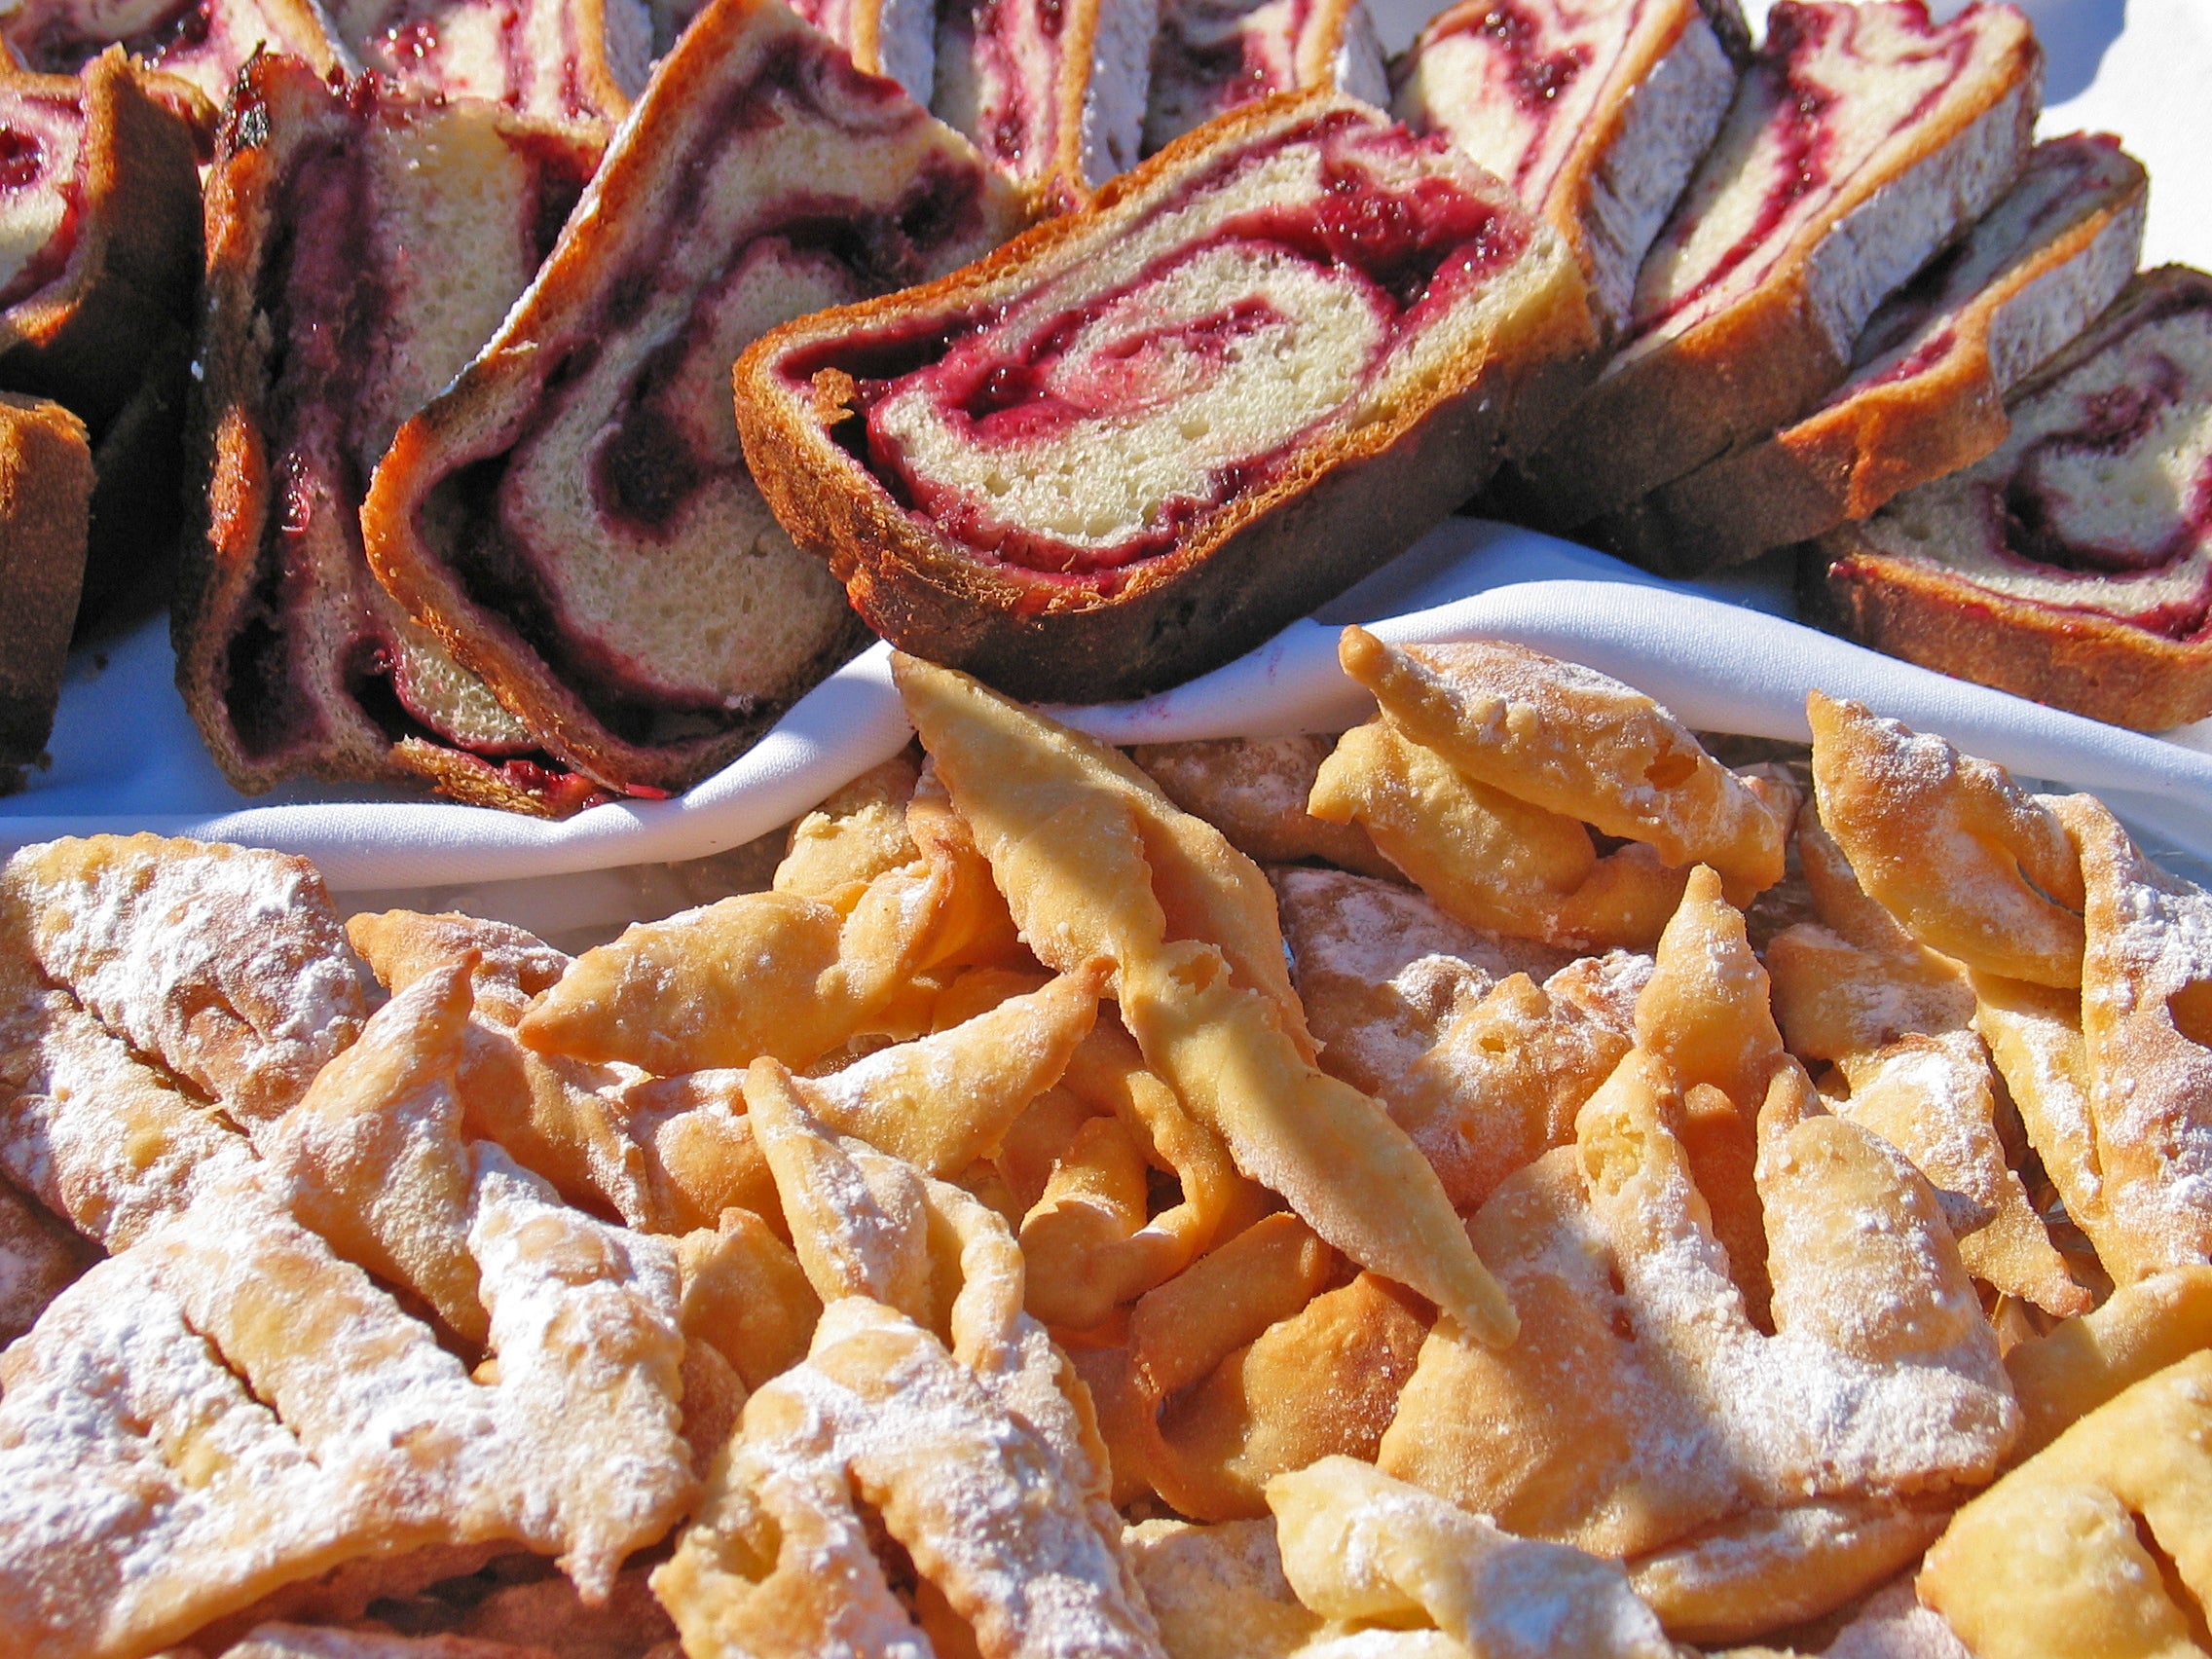 Typical local pastries in Maribor